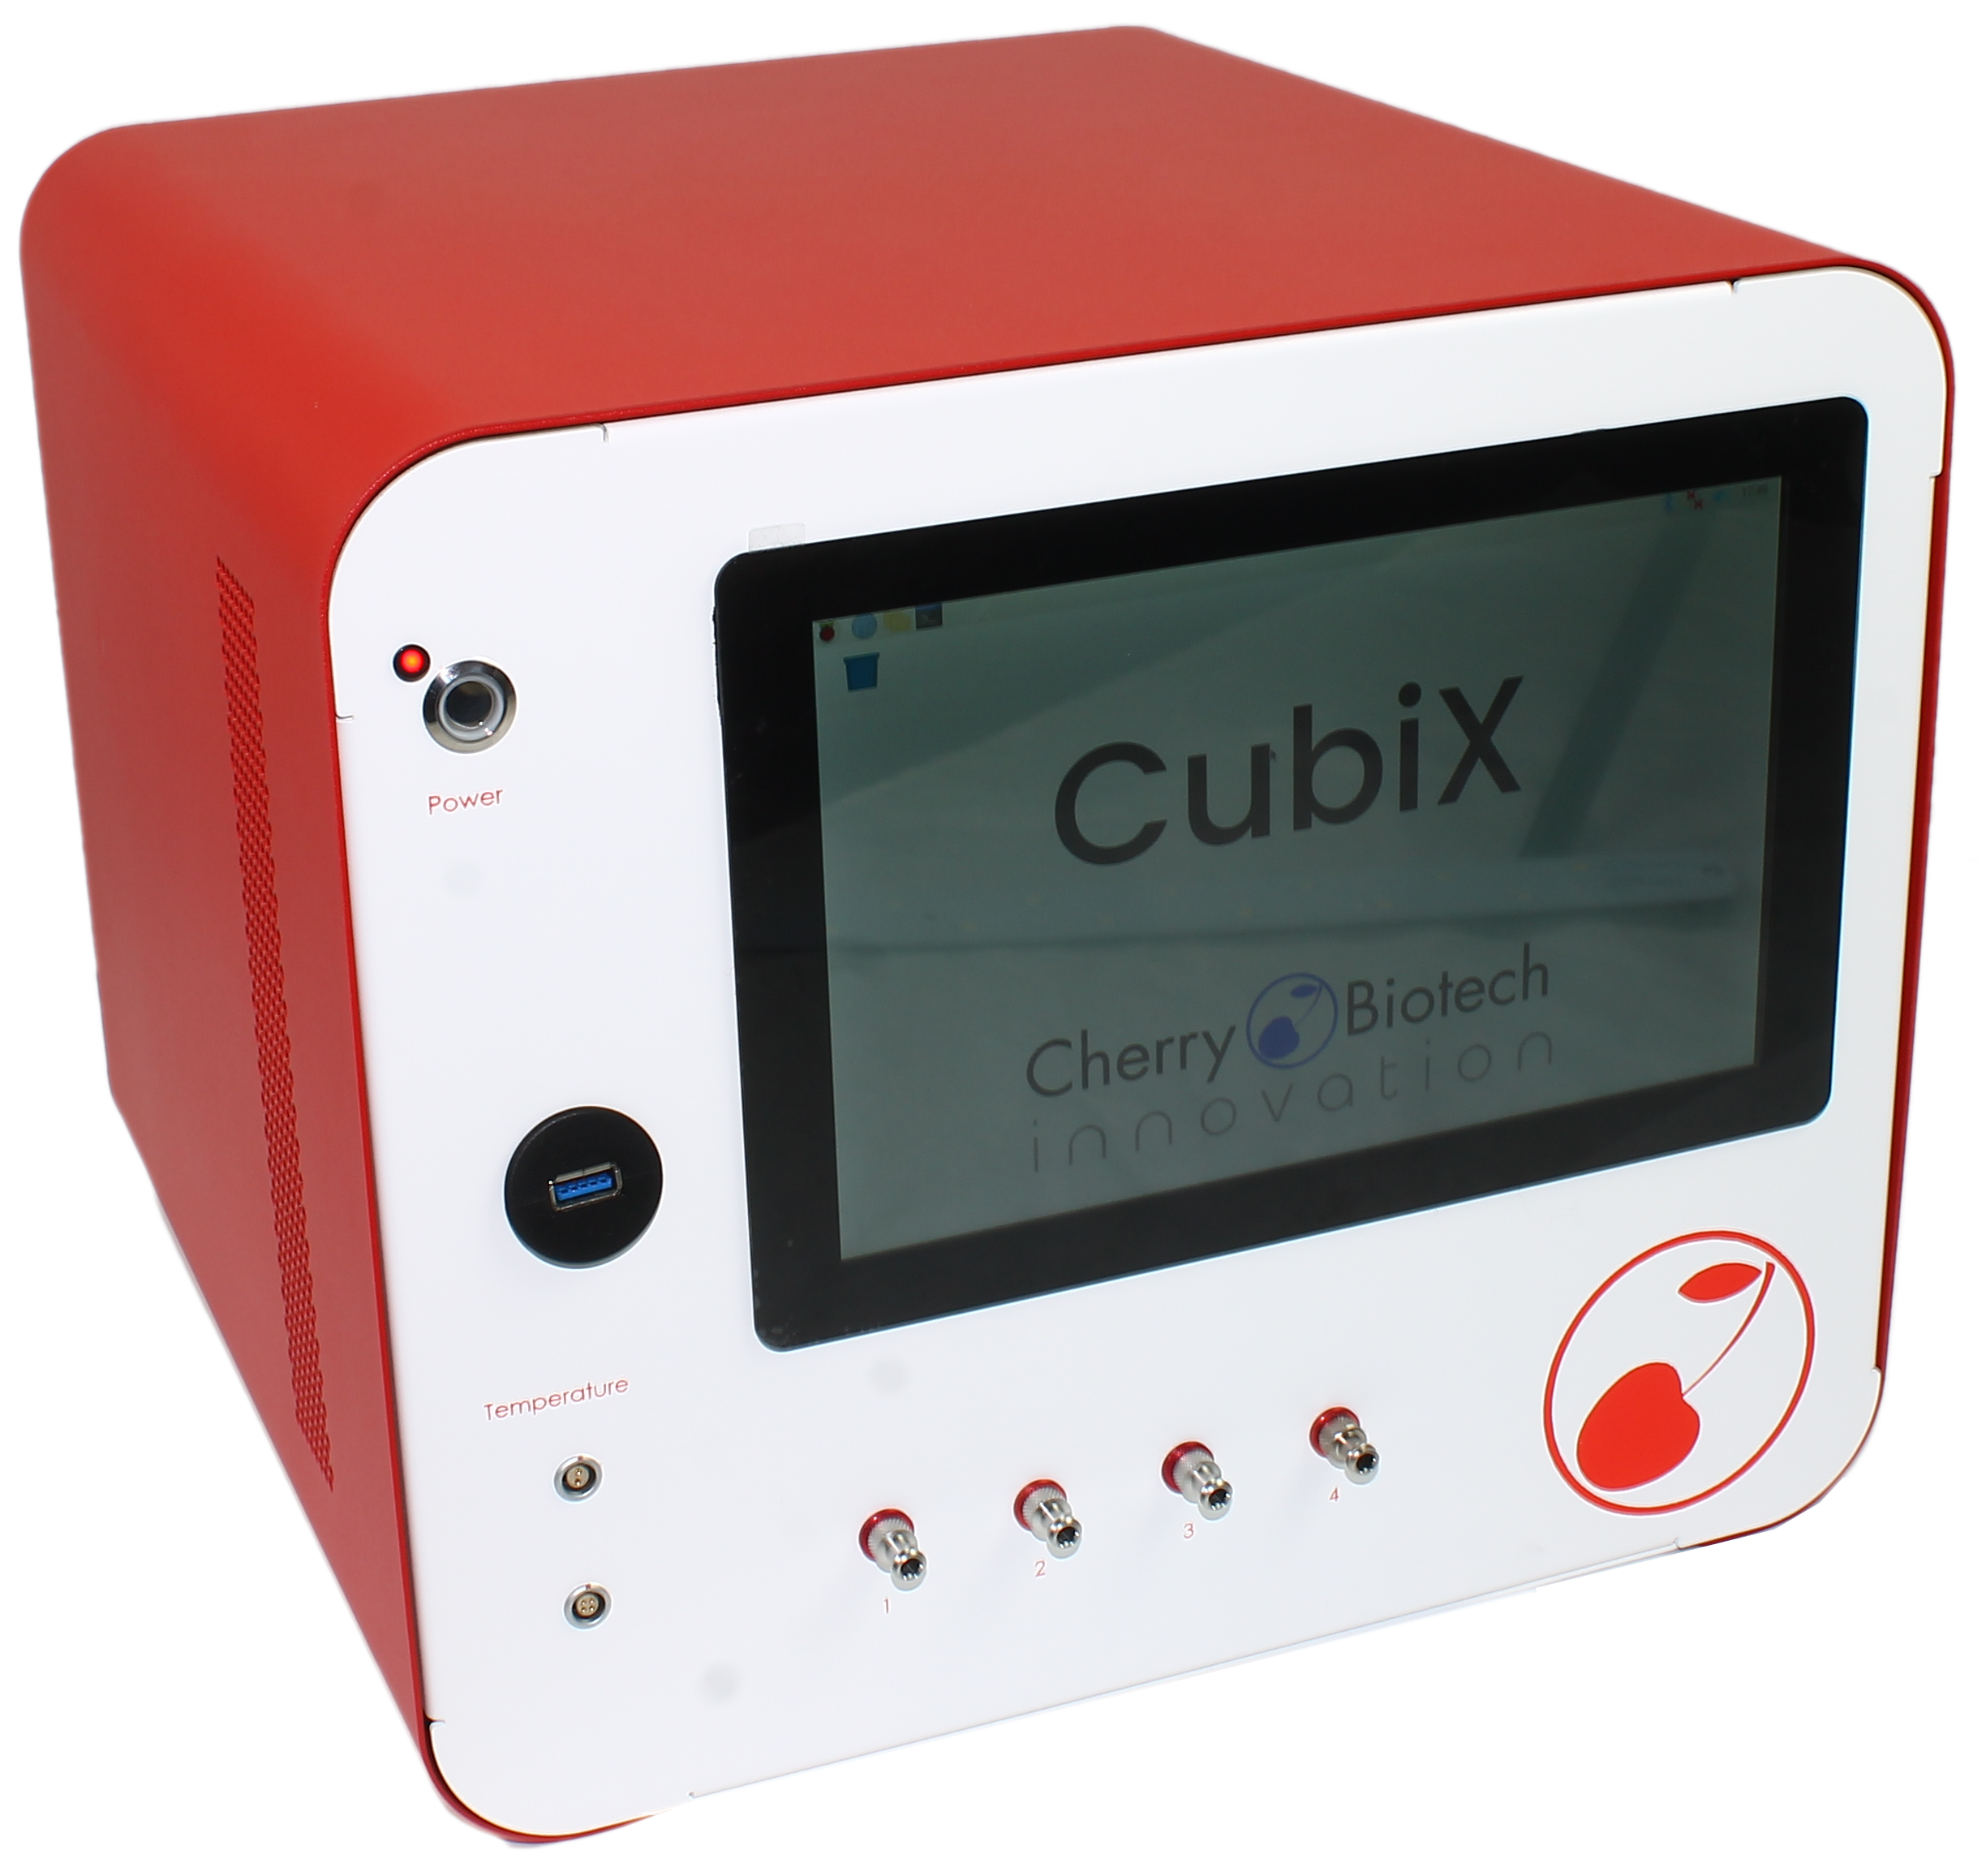 cubix- The first incubator-free microphysiological system in the world